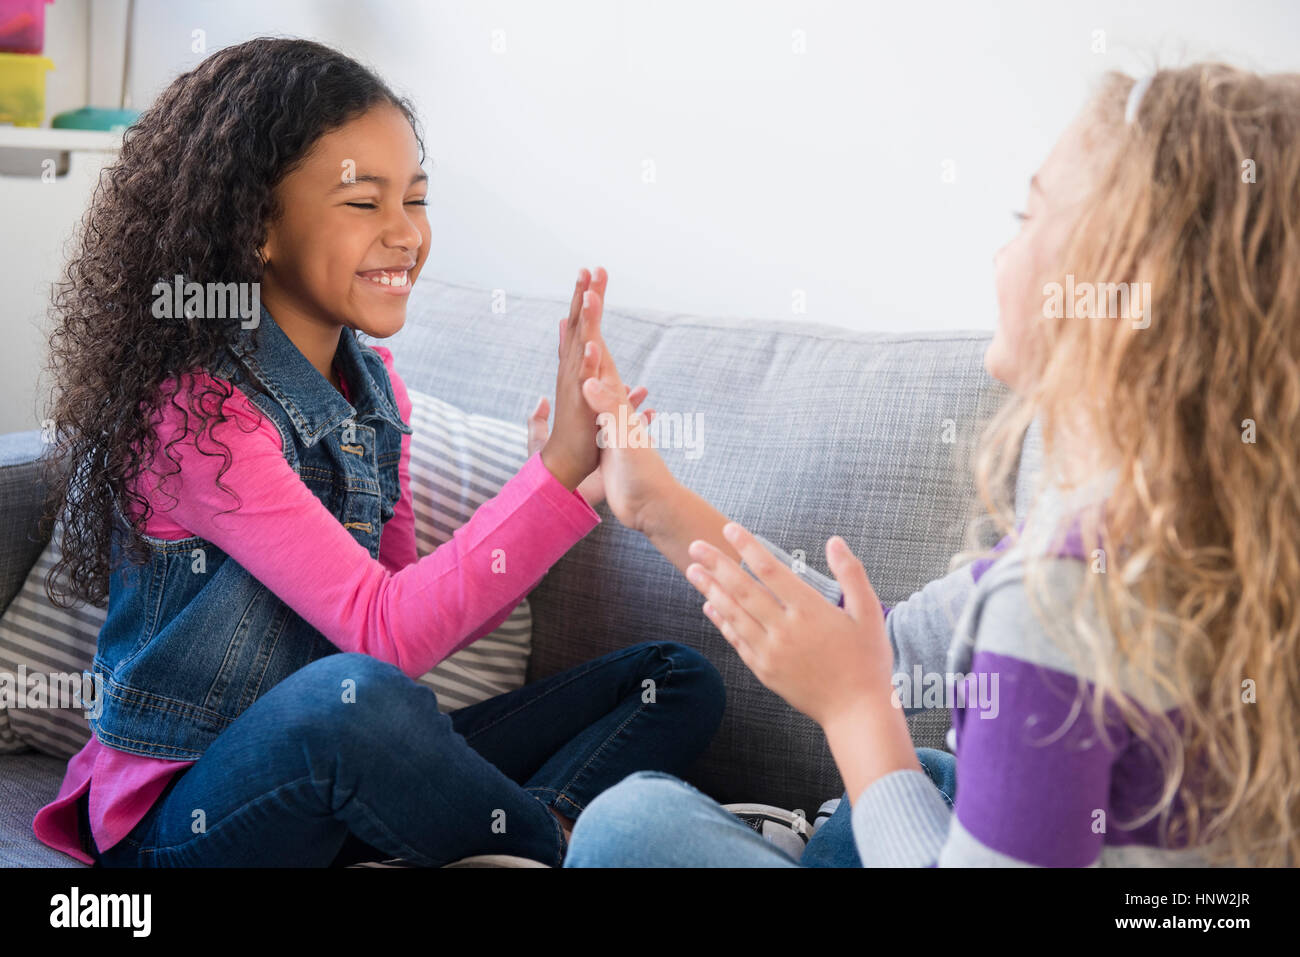 Smiling girls playing clapping game on sofa Stock Photo